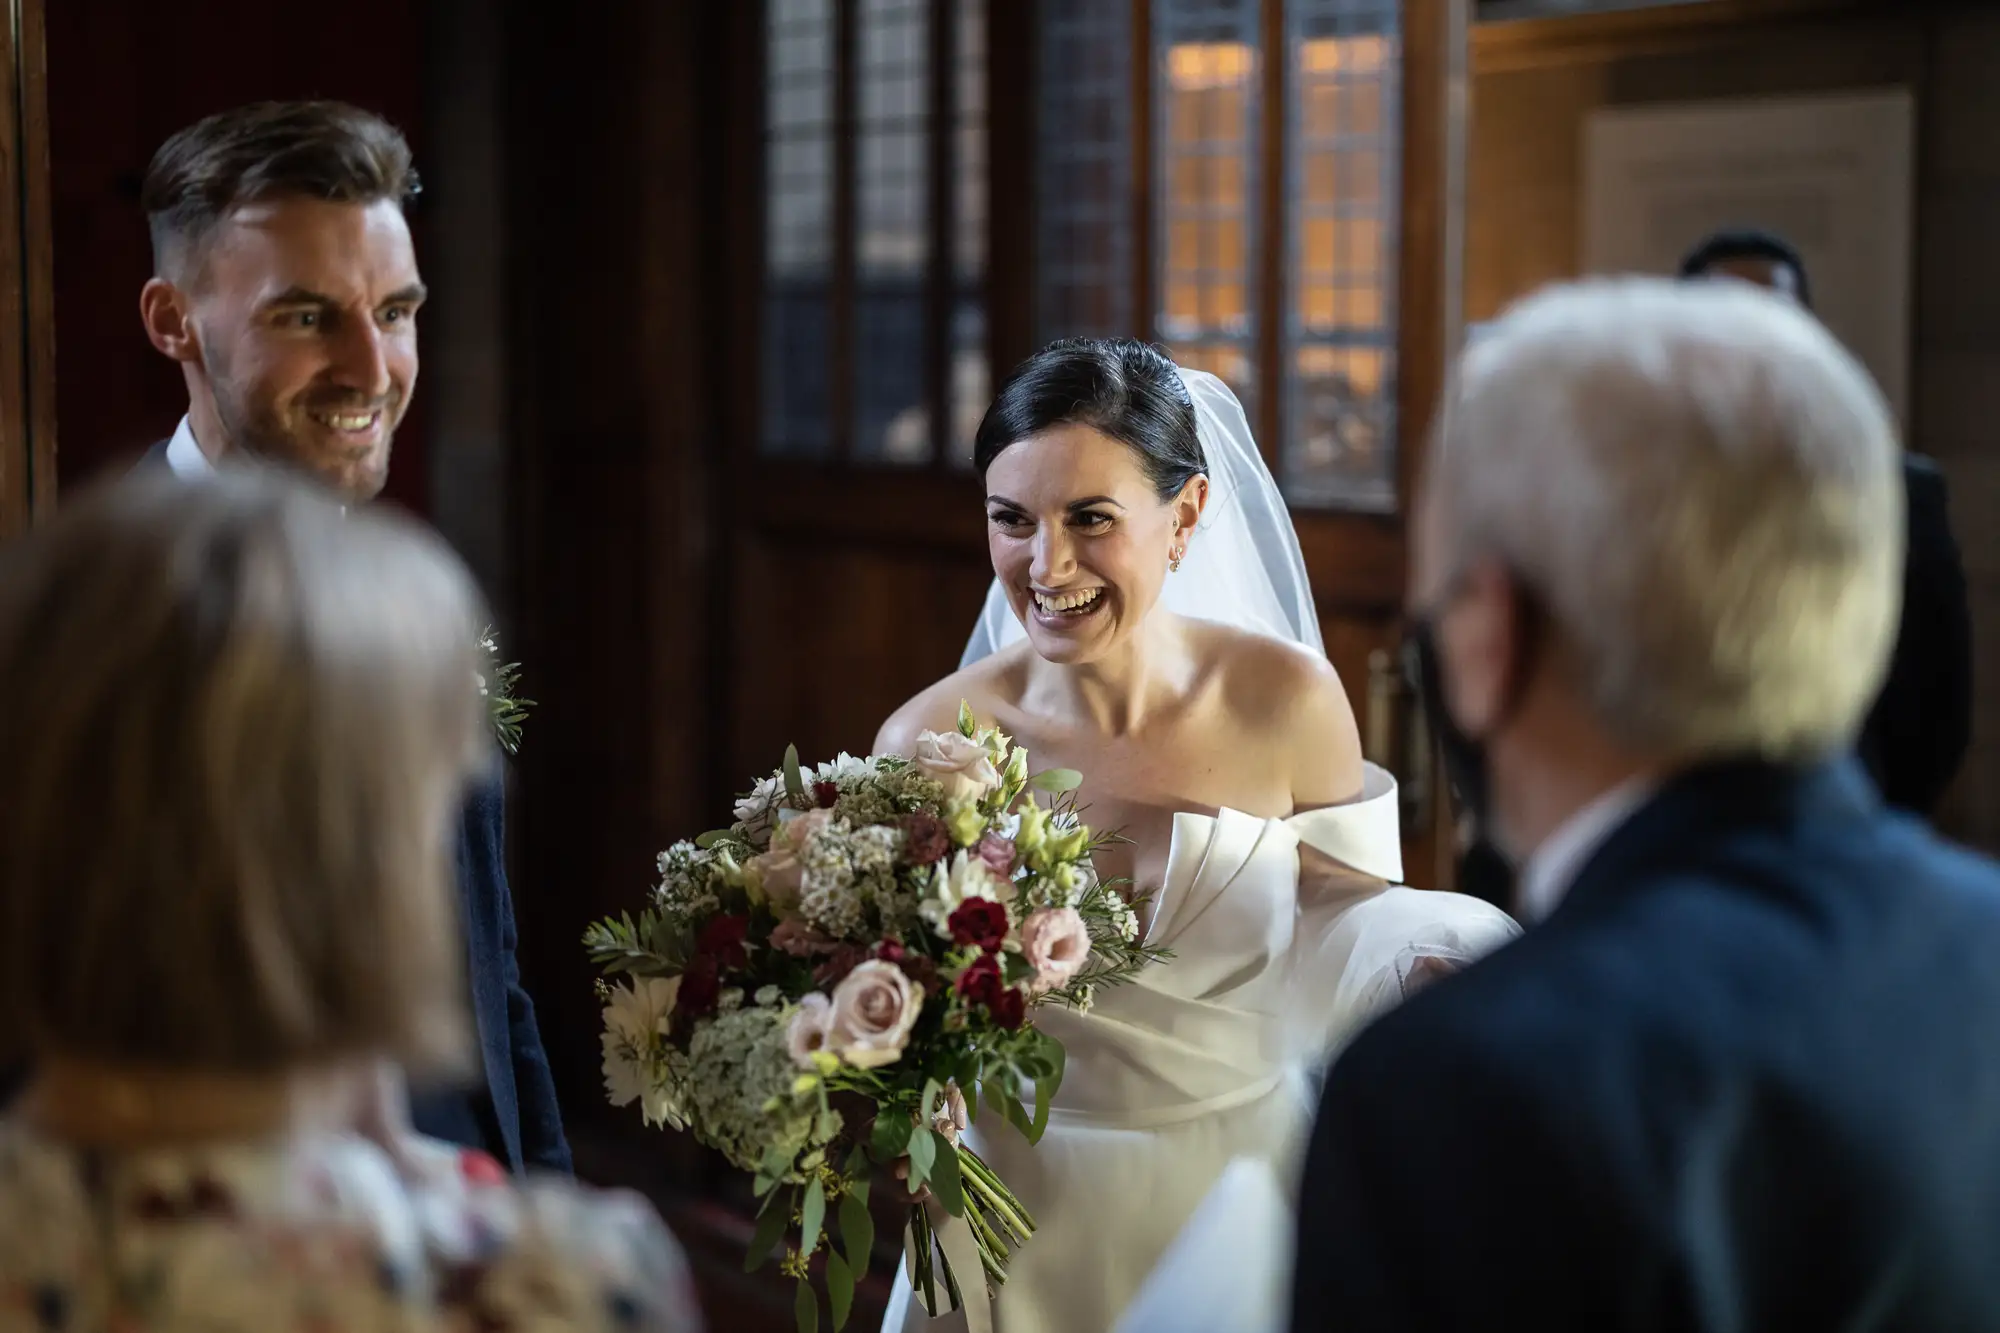 A bride and groom smiling joyously, surrounded by guests in a warmly lit indoor setting. the bride holds a bouquet of flowers.